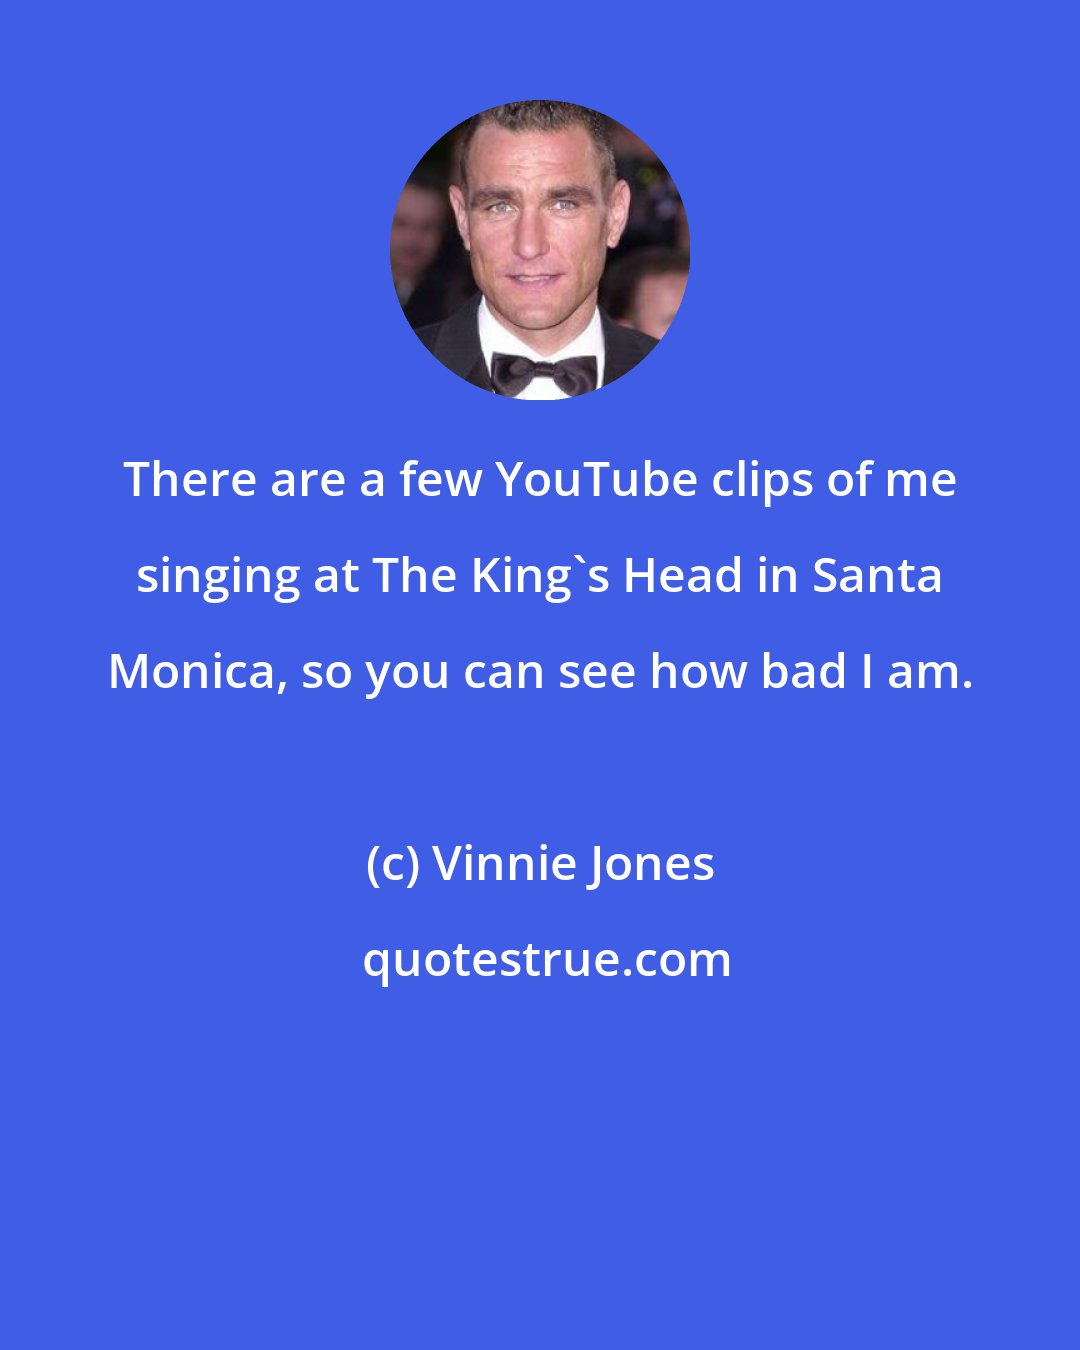 Vinnie Jones: There are a few YouTube clips of me singing at The King's Head in Santa Monica, so you can see how bad I am.